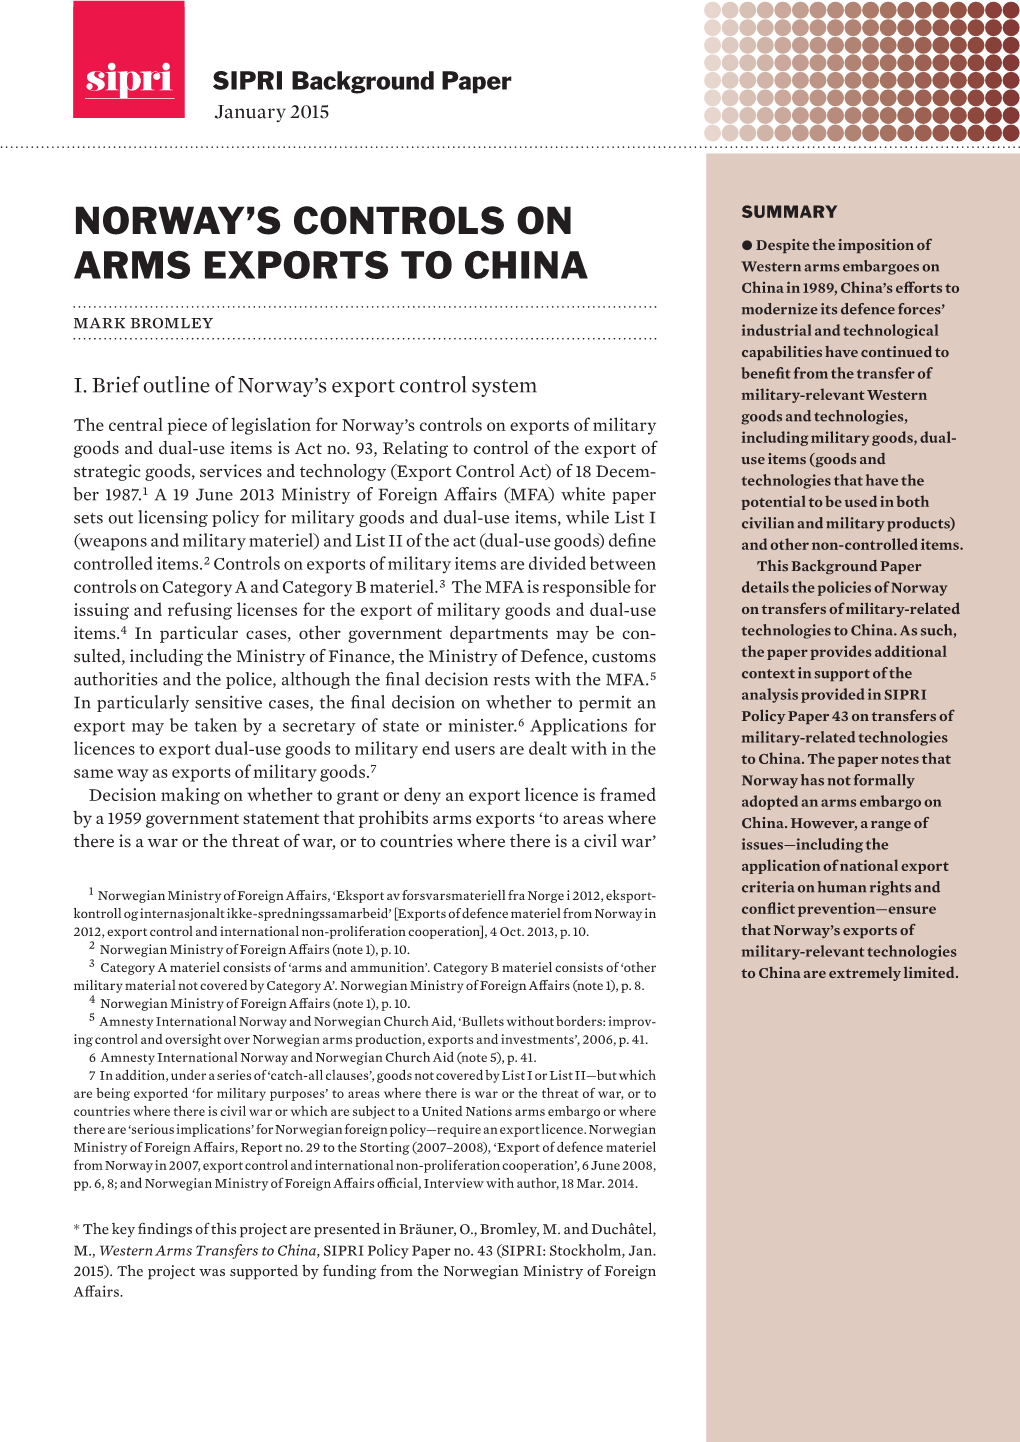 Norway's Controls on Arms Exports to China